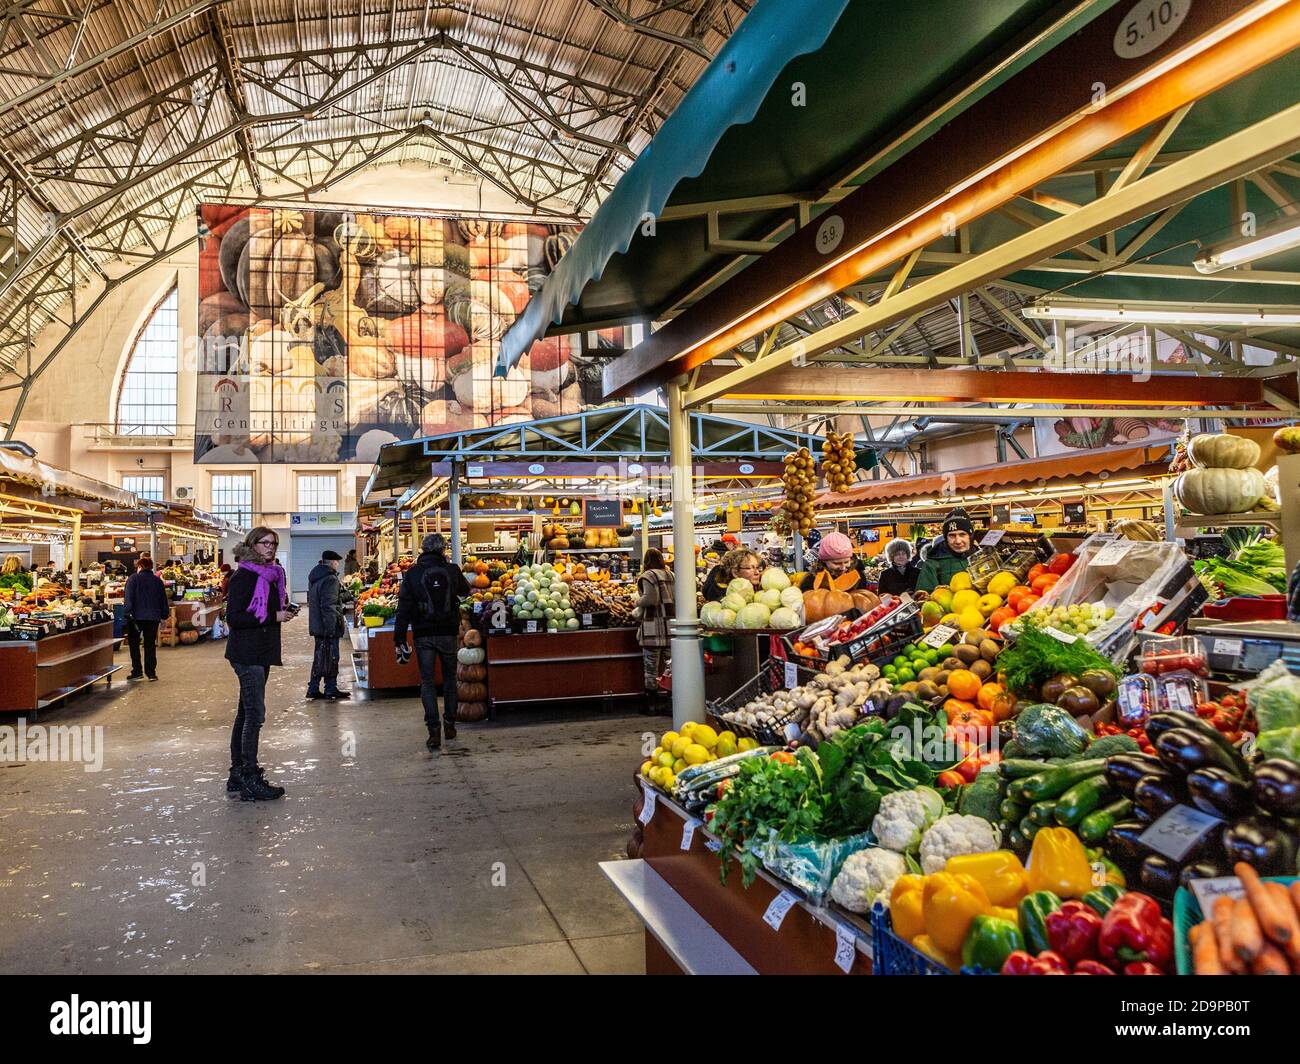 The central market in Riga, capital of Latvia, in the Baltic region of northern Europe. The market is in a building that once housed zeppelins. Stock Photo